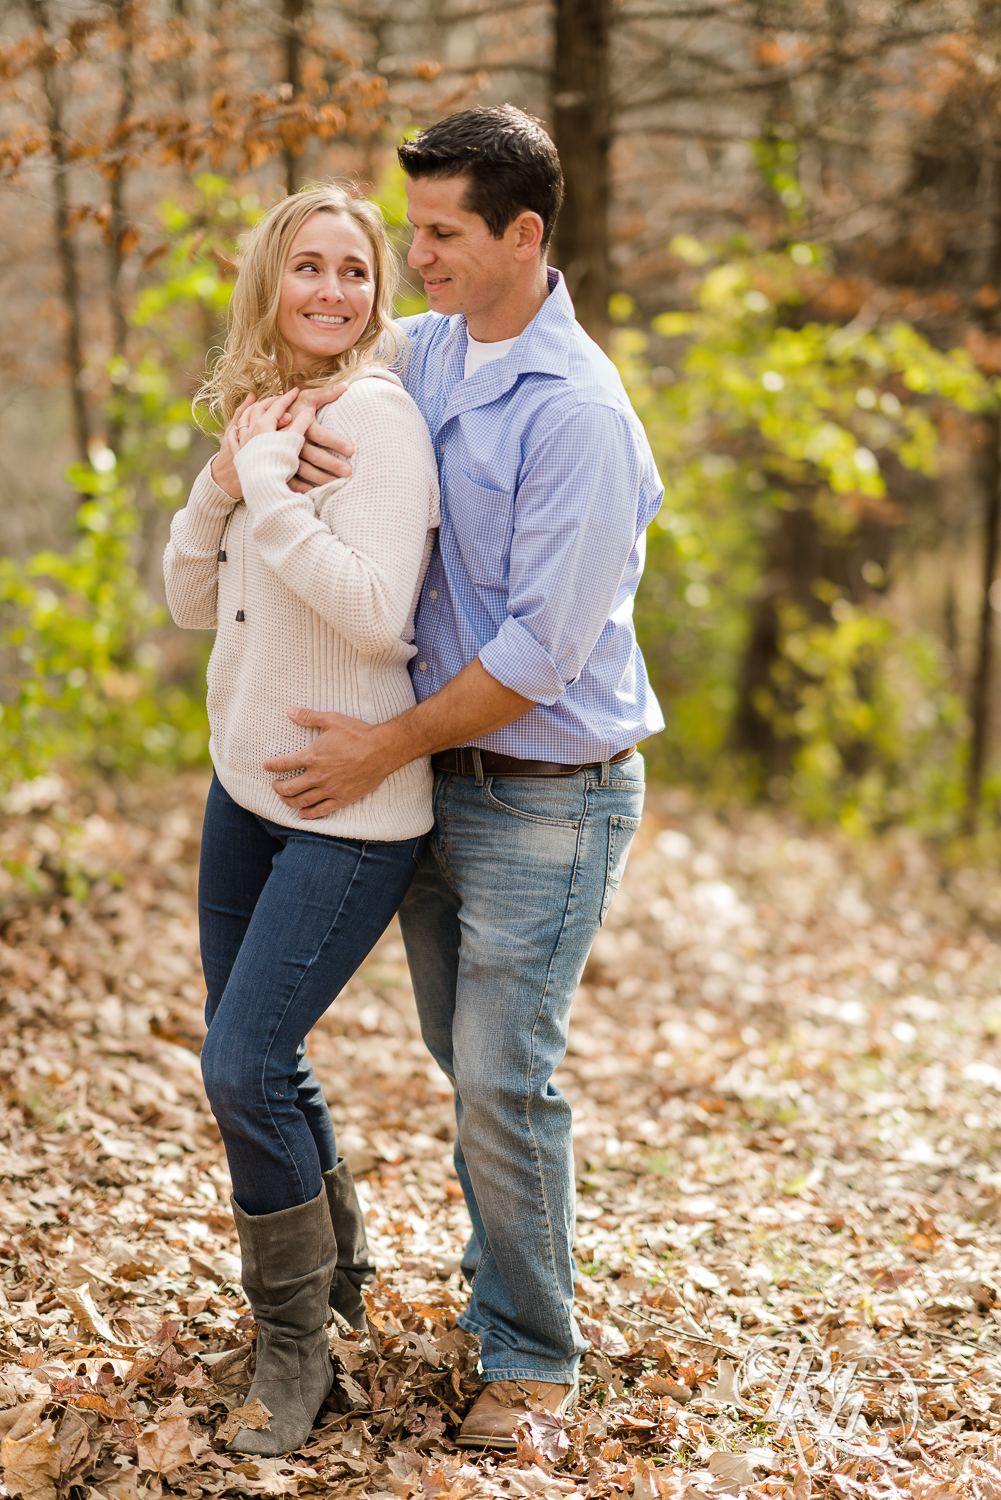 Man and blonde woman smiling in leaves during fall engagement photography session in Chaska, Minnesota.